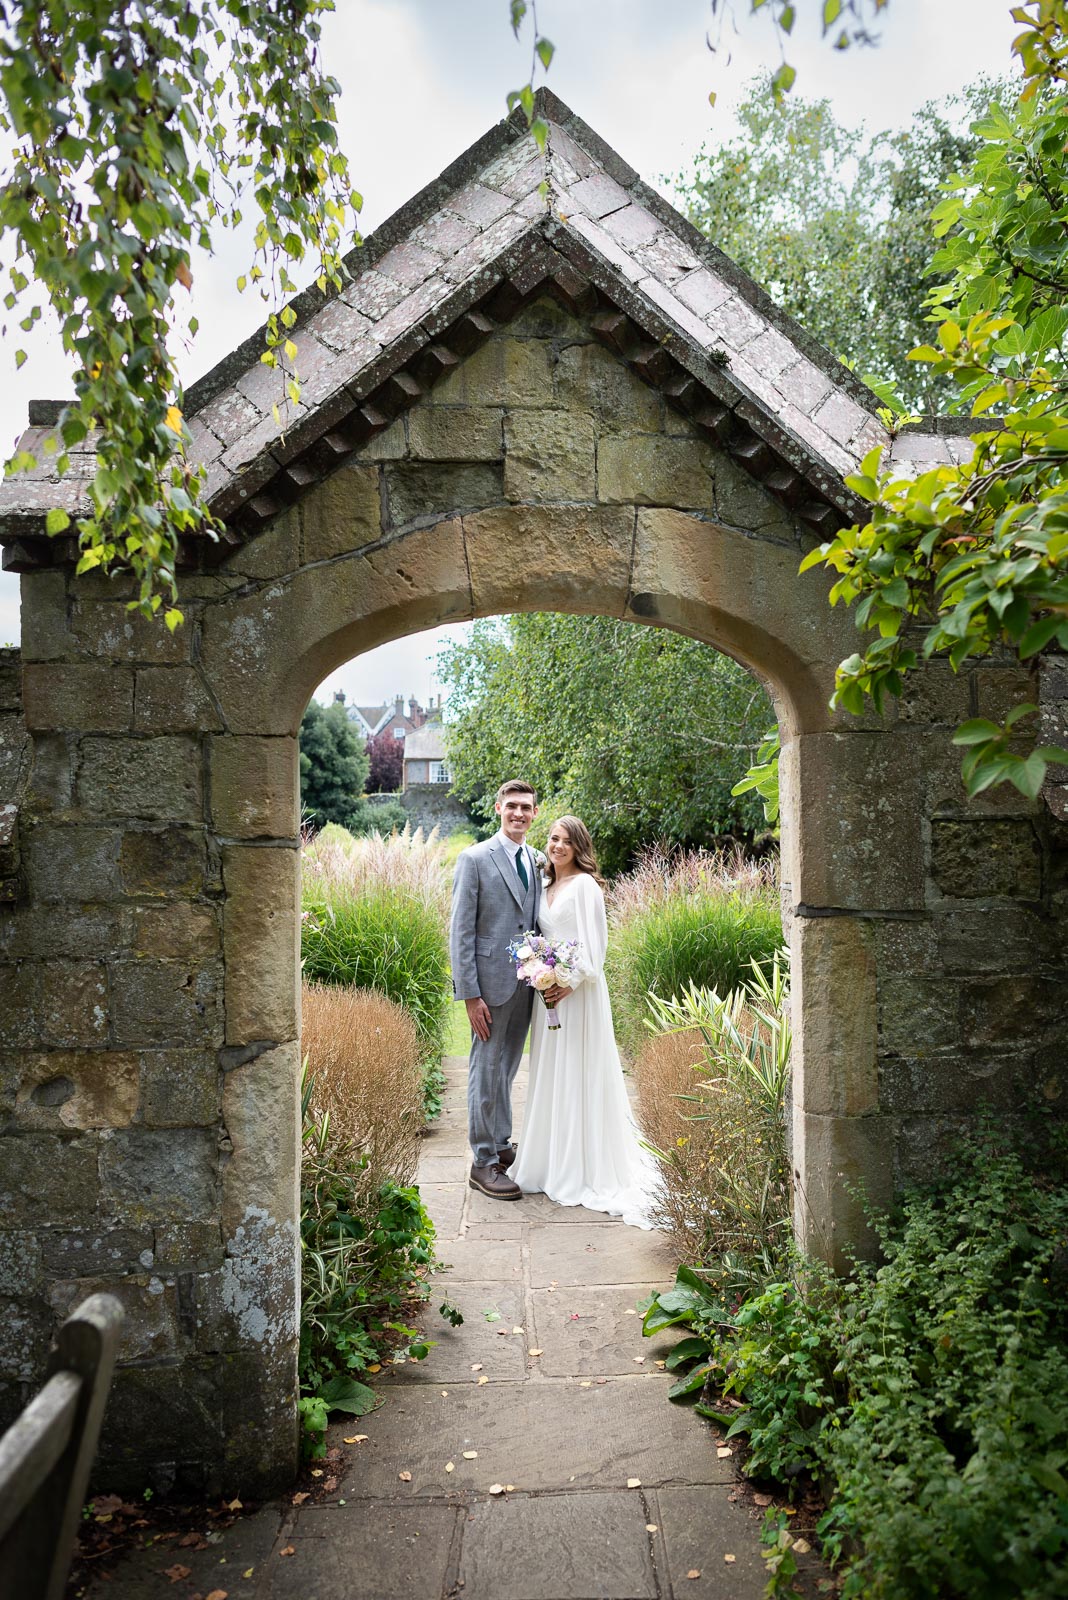 Mark and May pose in one of the historic arches at Southover Grange in Lewes